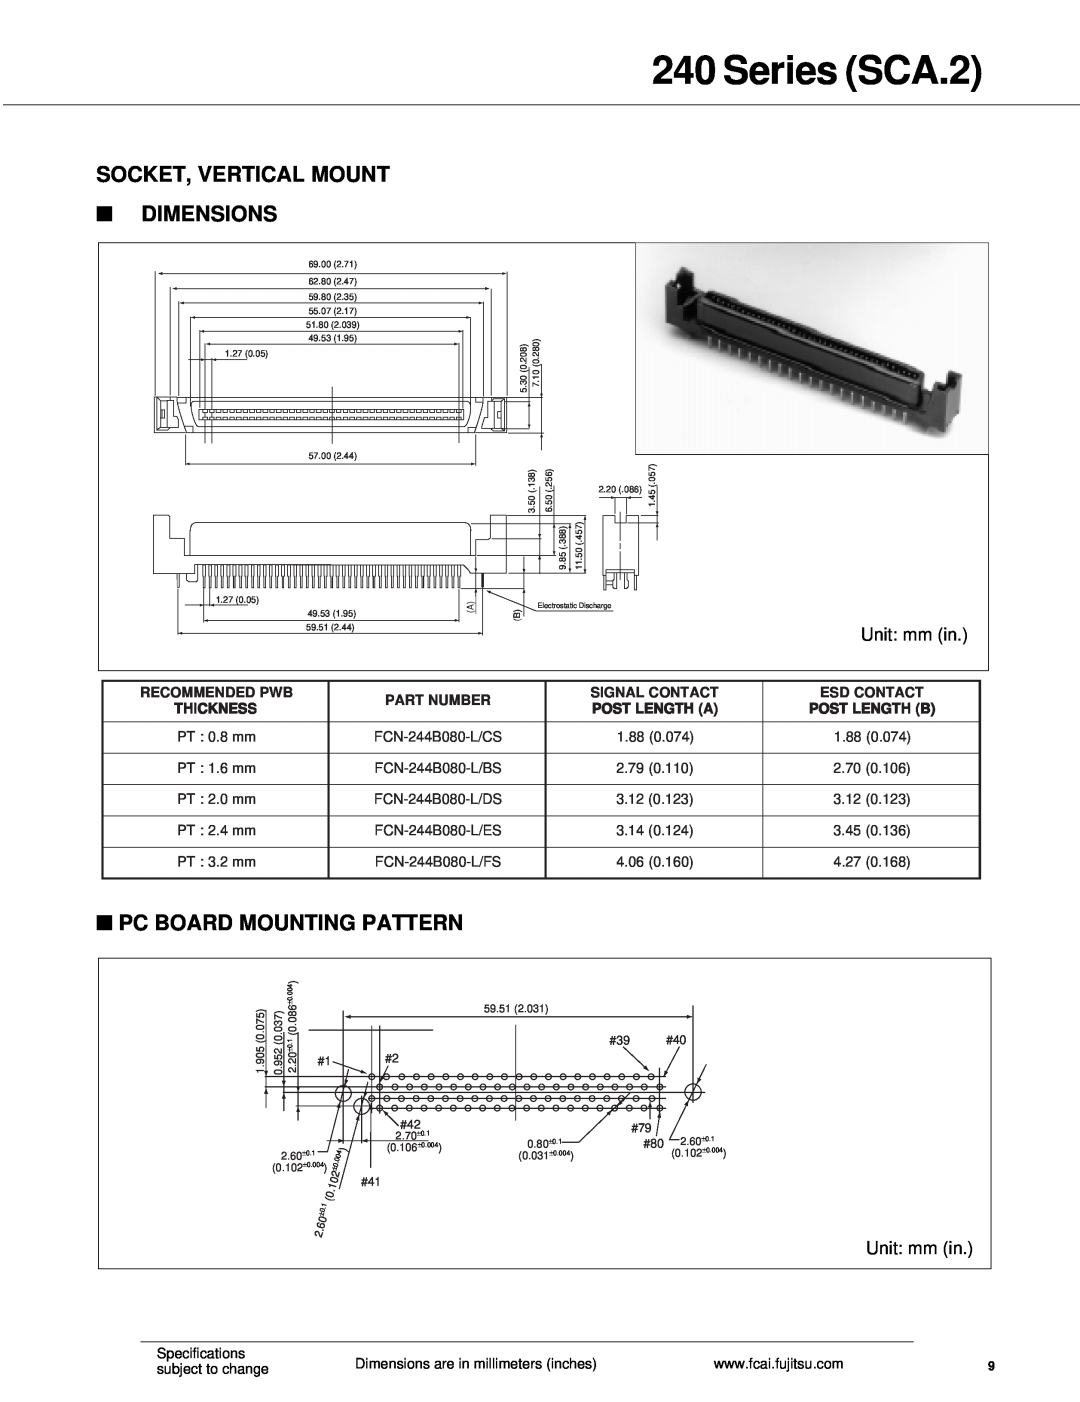 Fujitsu SCA.1 Series SCA.2, Socket, Vertical Mount, Dimensions, Pc Board Mounting Pattern, Recommended Pwb, Part Number 